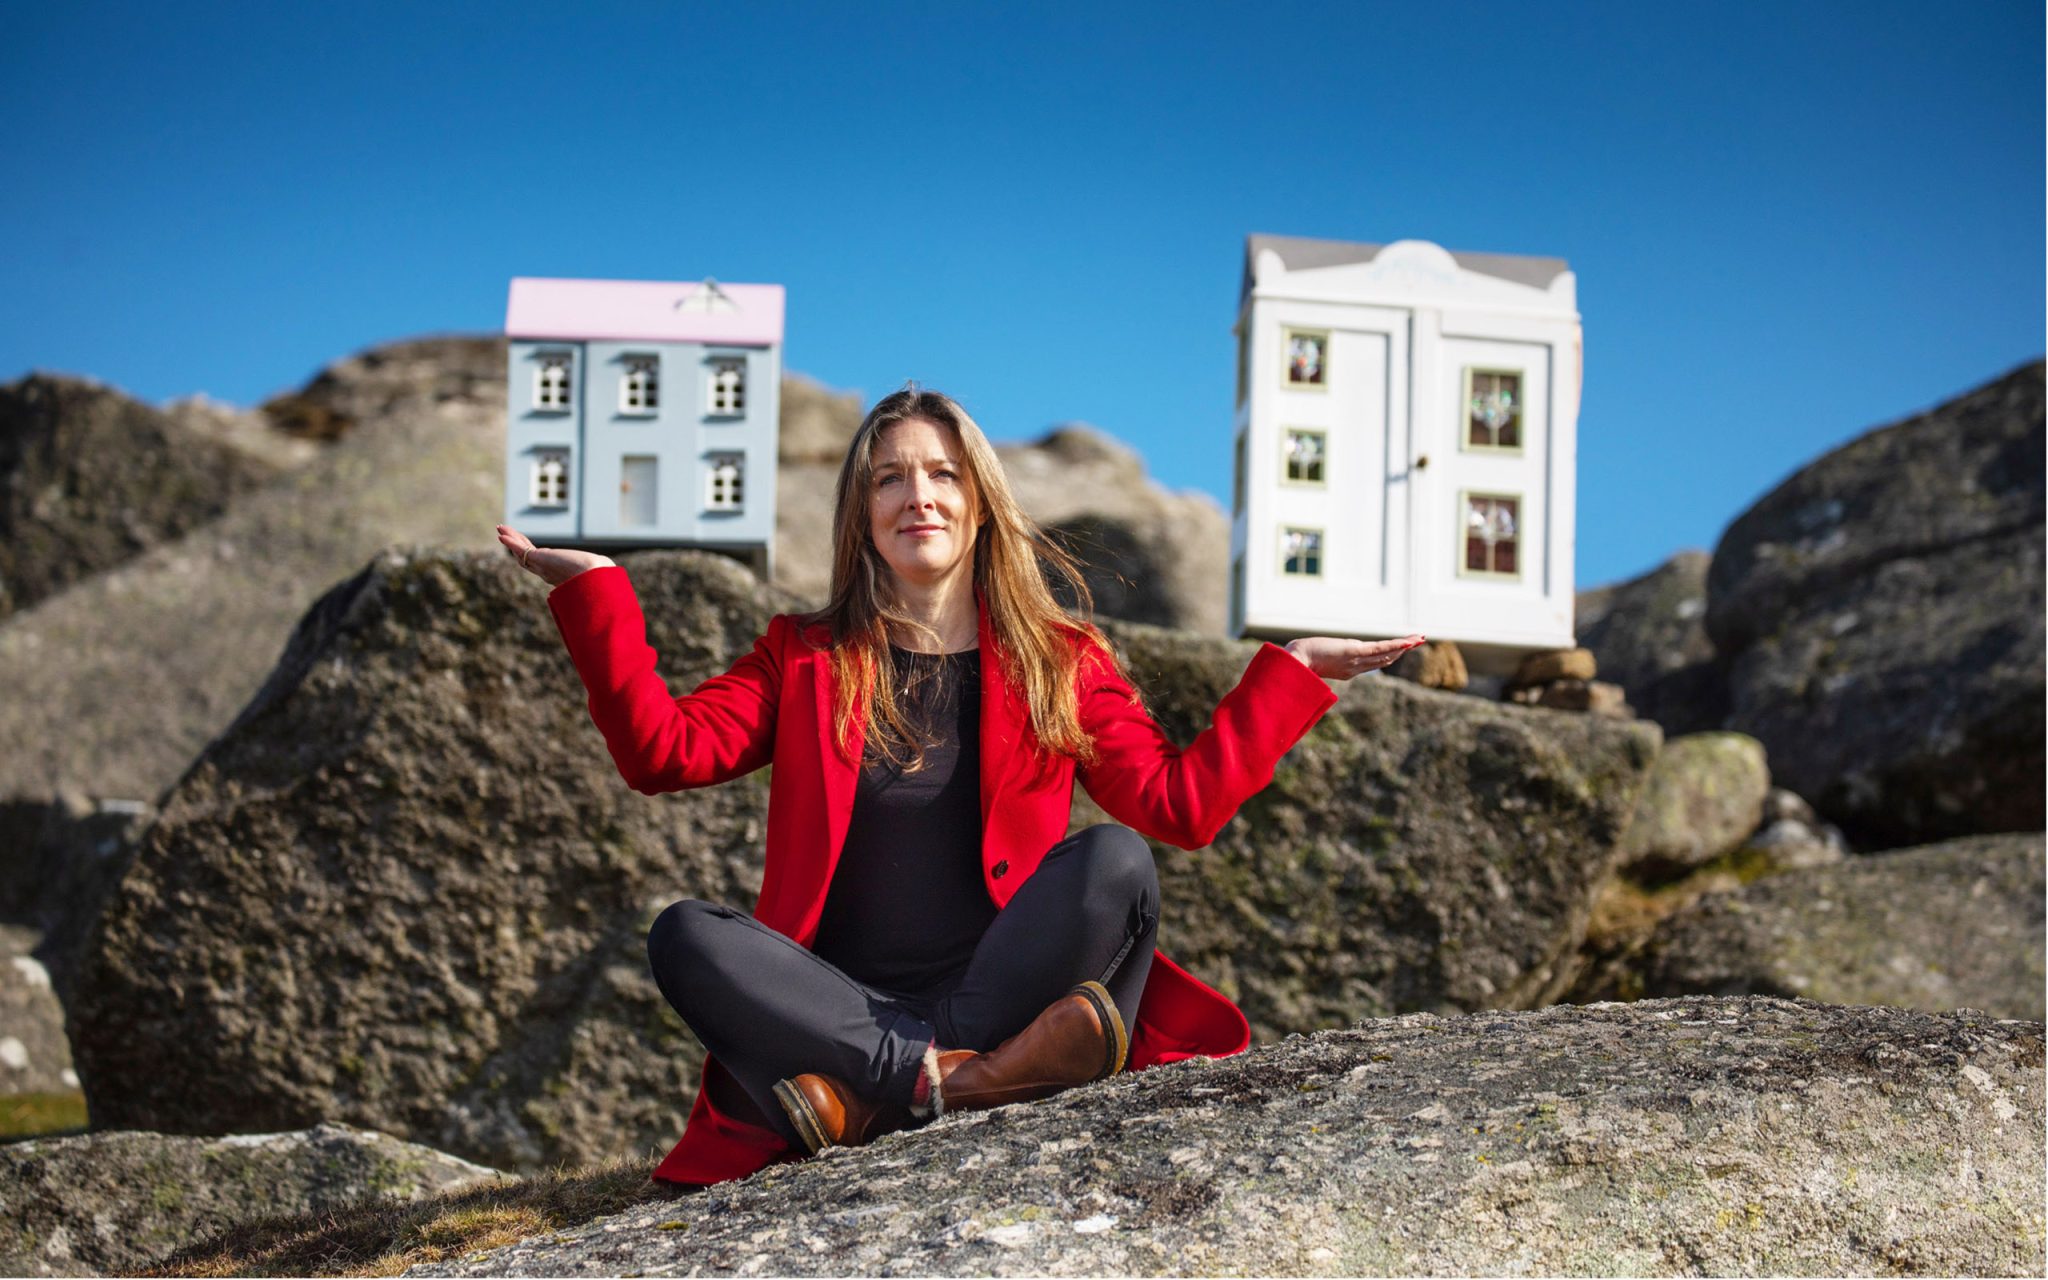 Kate Griffin of Sawdye & Harris Estate Agents holds aloft two fine houses, while practicing yoga at Bone Hill Rocks. #We Are Dartmoor. Part of the story commissioned by DNPA celebrating the people who make their livelihoods within the boundaries of Dartmoor National Park.